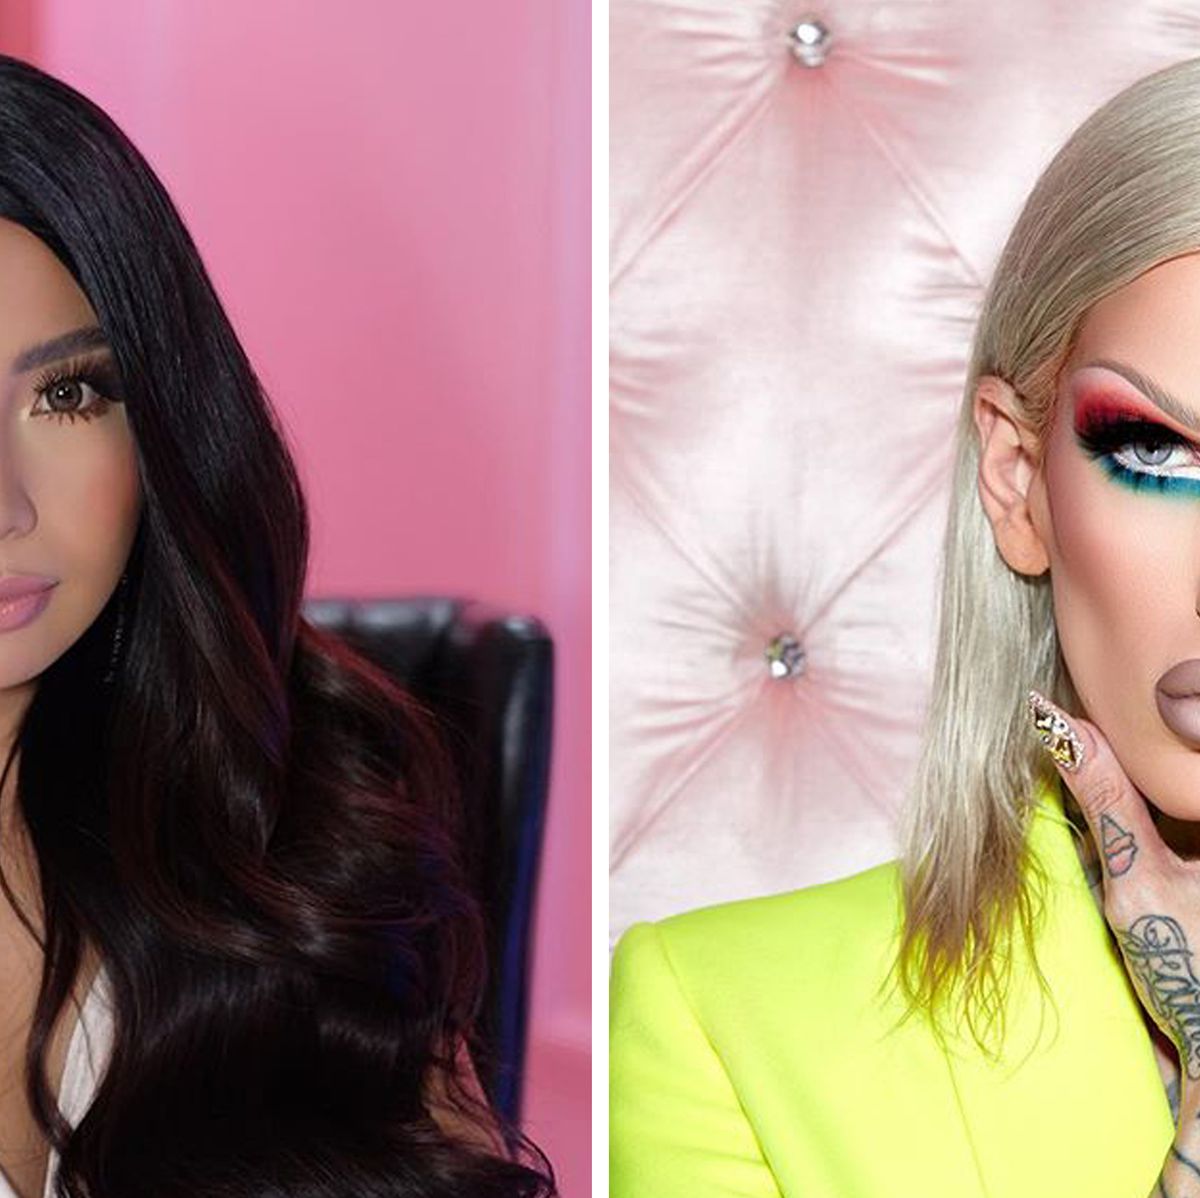 Jeffree Star just publicly dissed Michelle Dy